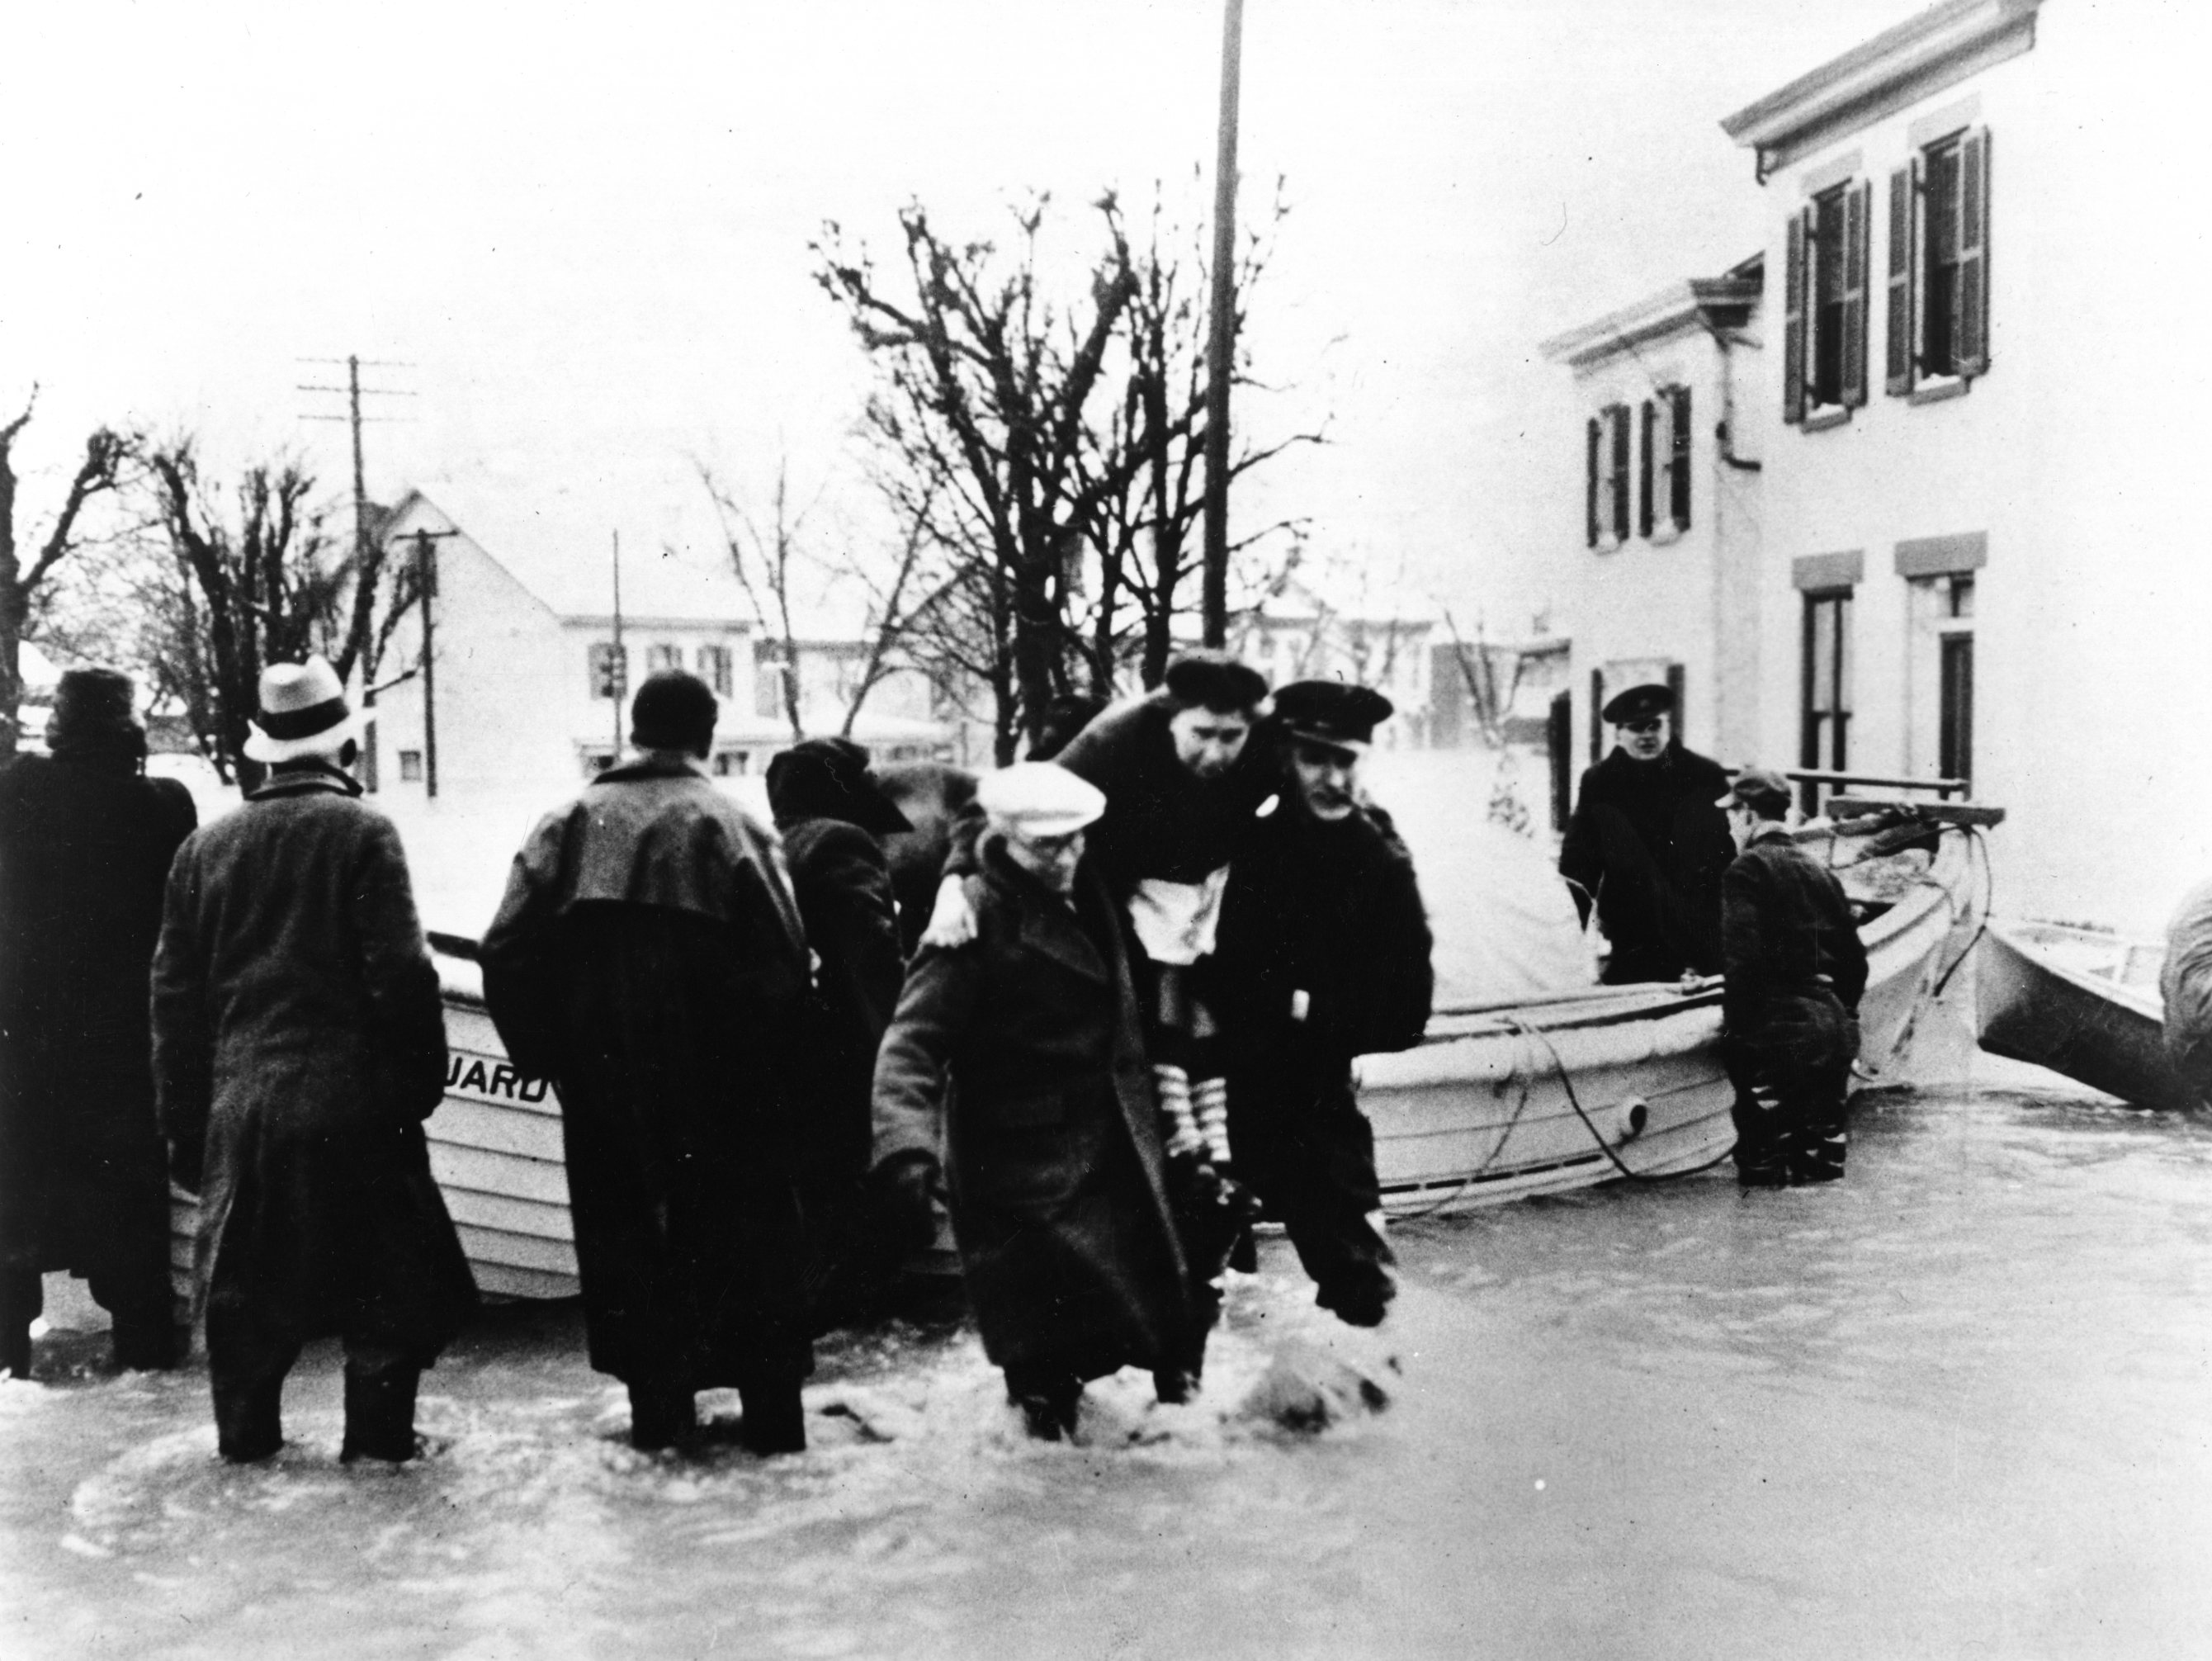 Coast Guardsmen rescuing survivors from flooded homes in Lawrenceburg, Ohio. (U.S. Coast Guard)